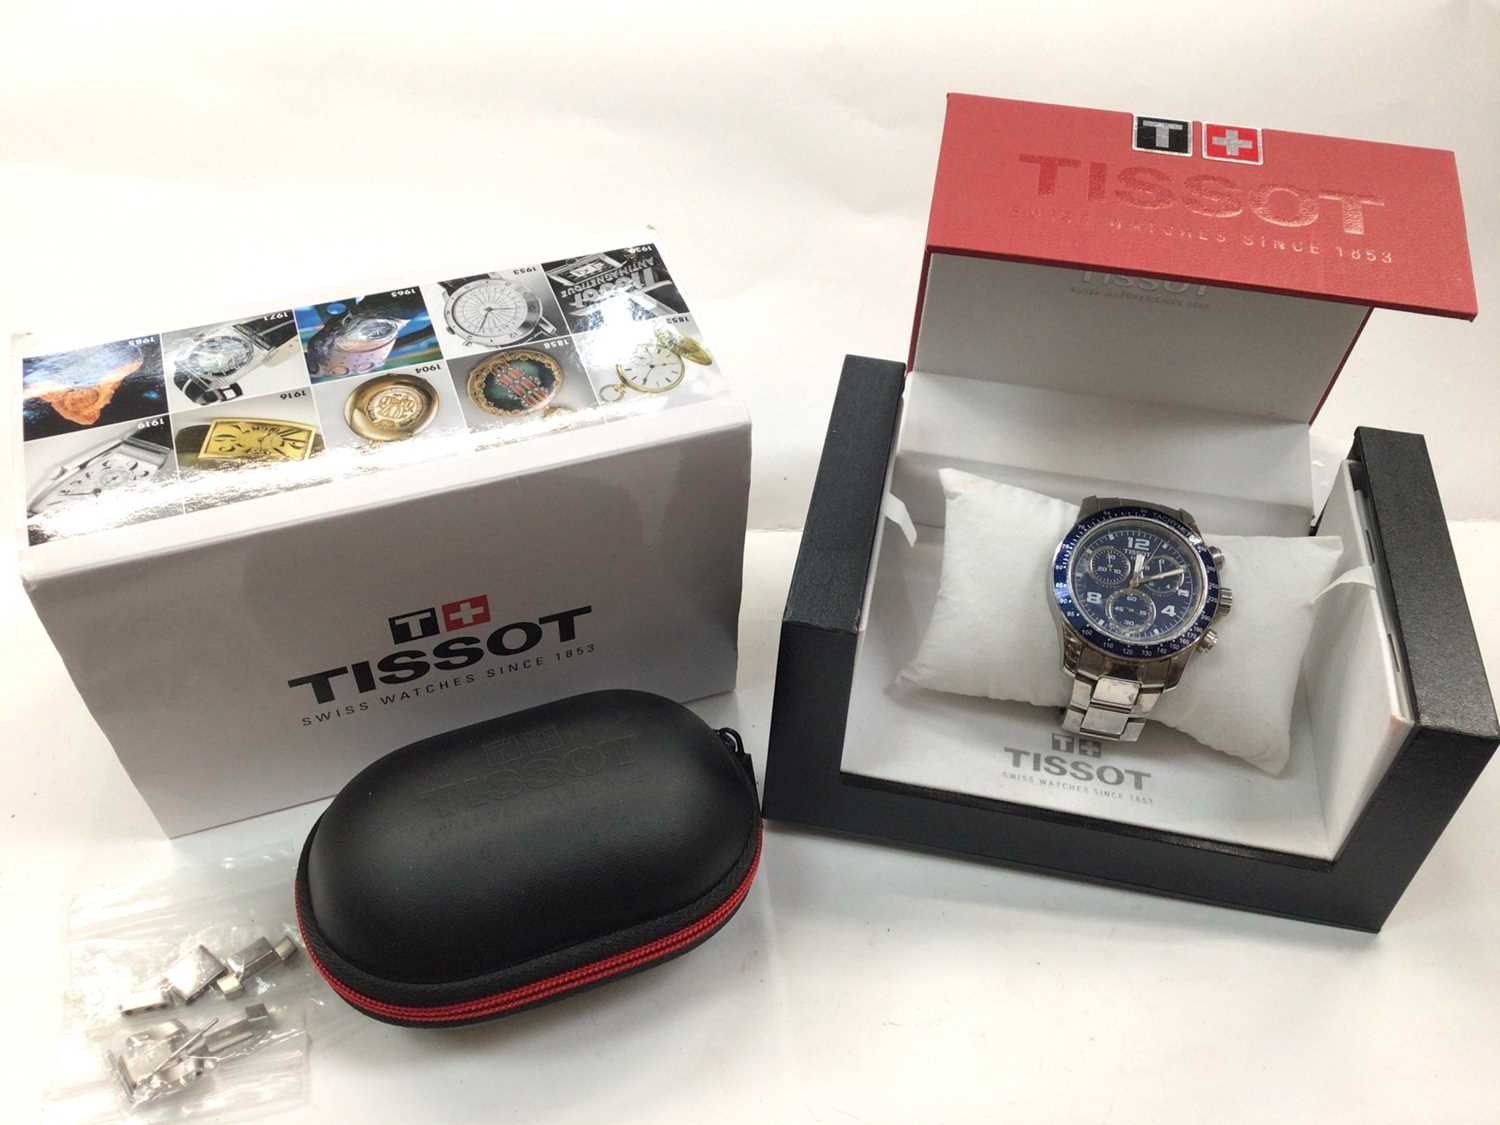 Gentlemen’s Tissot Chronograph stainless steel wristwatch, boxed with papers